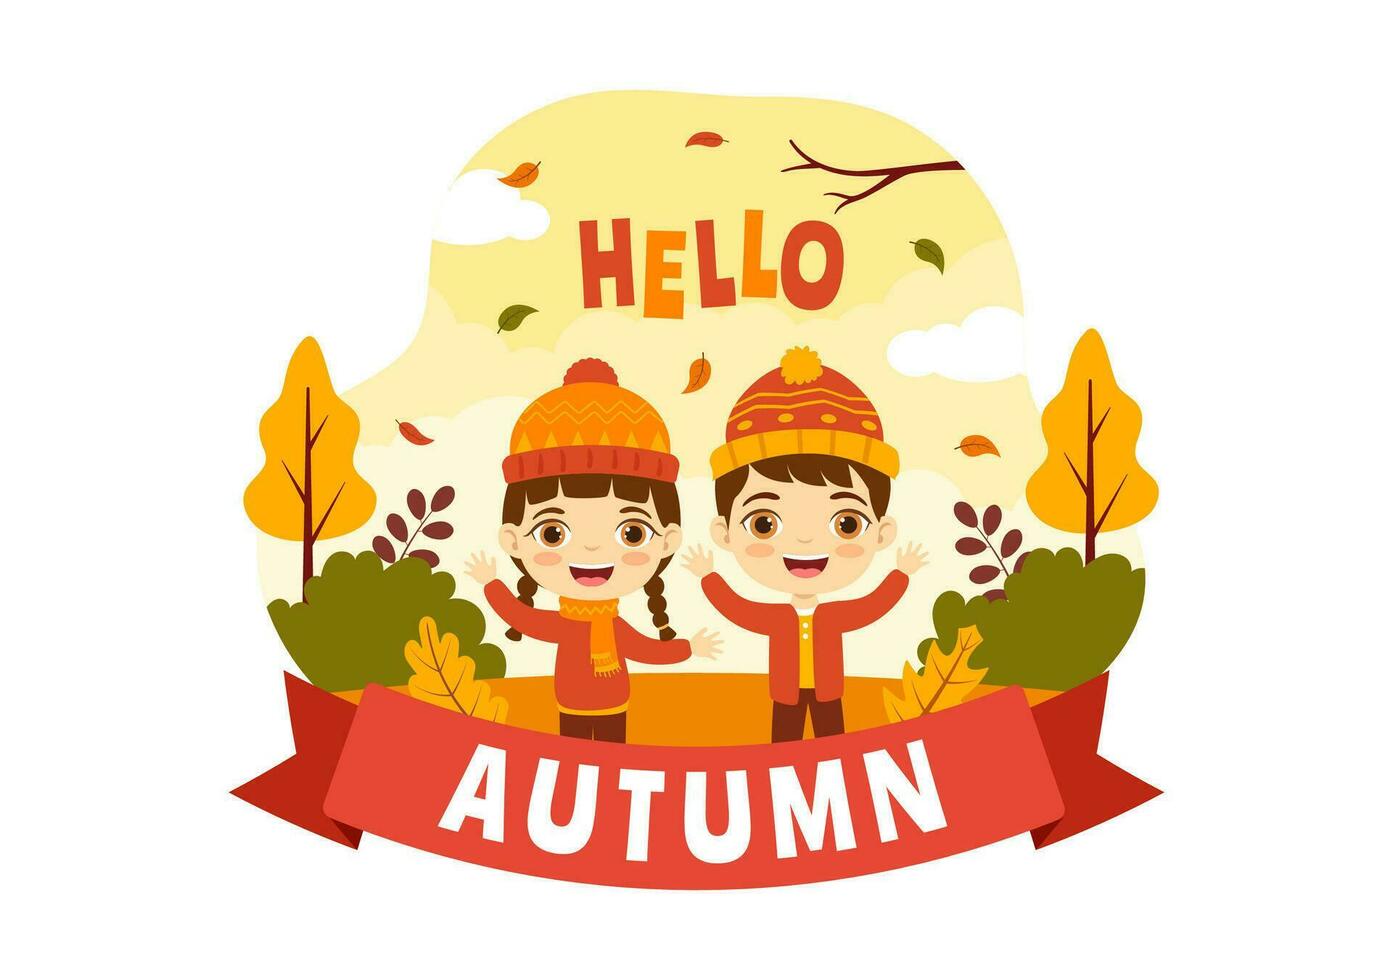 Autumn Vector Illustration Kids Panoramic of Mountains and Maple Trees Fallen with Yellow Foliage in Cartoon Hand Drawn Landing Page Templates